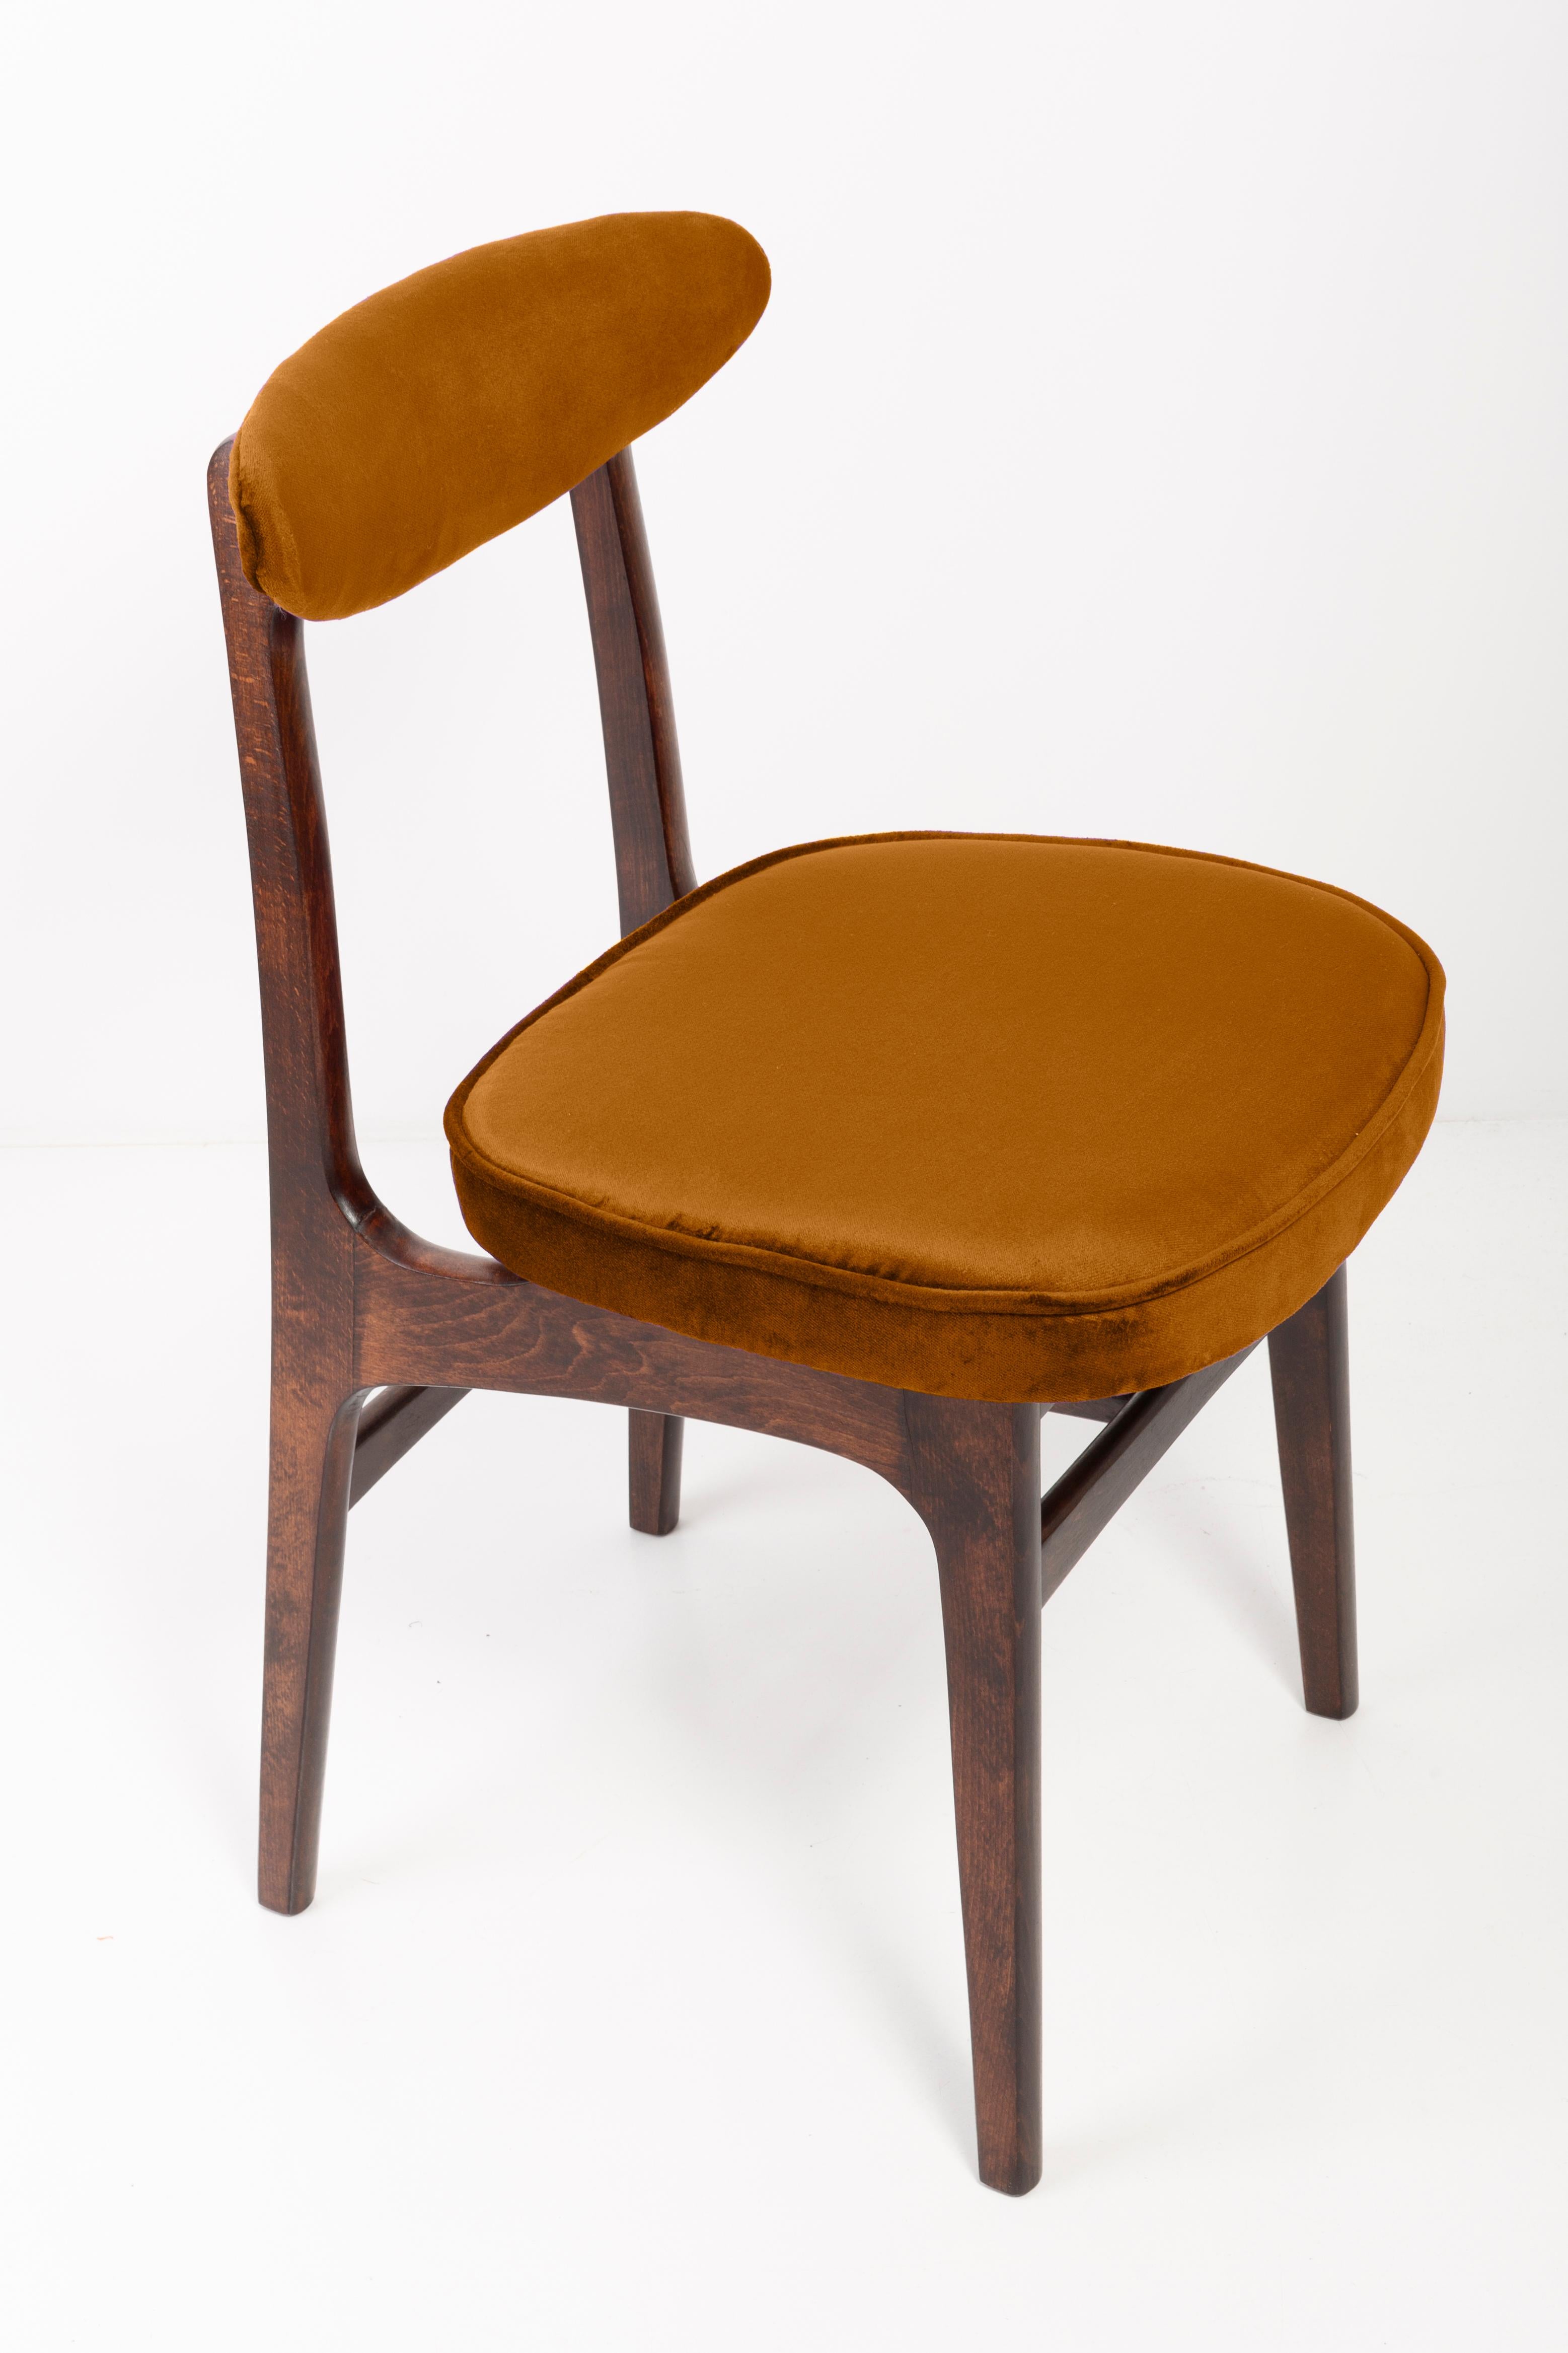 Twelve chairs designed by Prof. Rajmund Halas. It has been made of beechwood. Chairs are after undergone a complete upholstery renovation, the woodwork has been refreshed. Seats and backs were dressed in a copper (color 960), durable and pleasant to